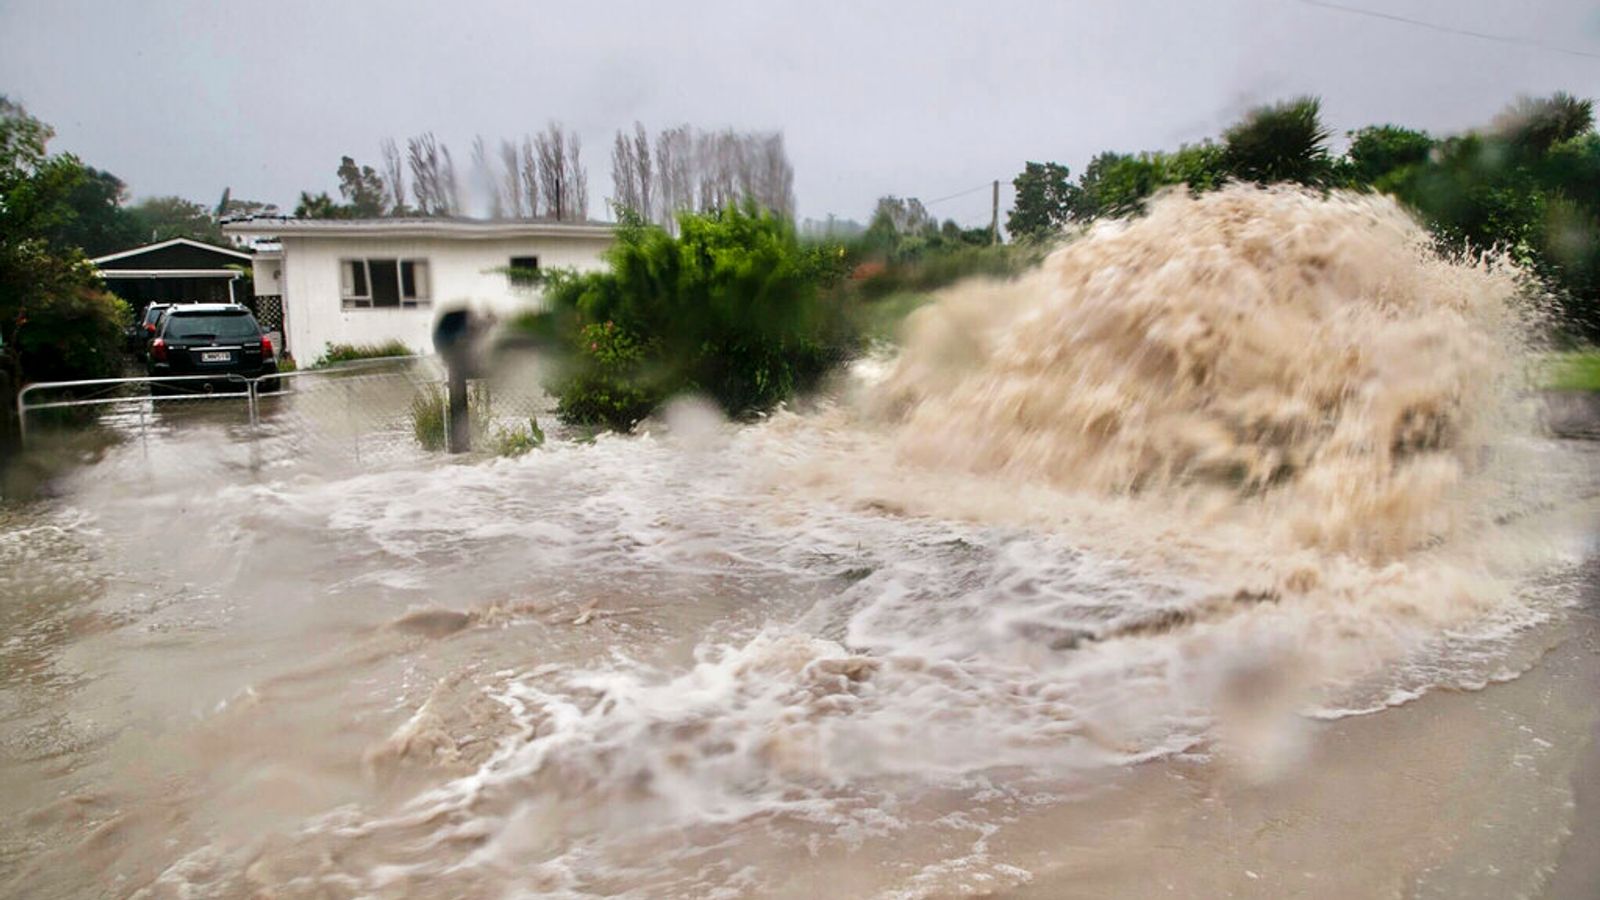 New Zealand has declared a state of emergency after Cyclone Gabrielle